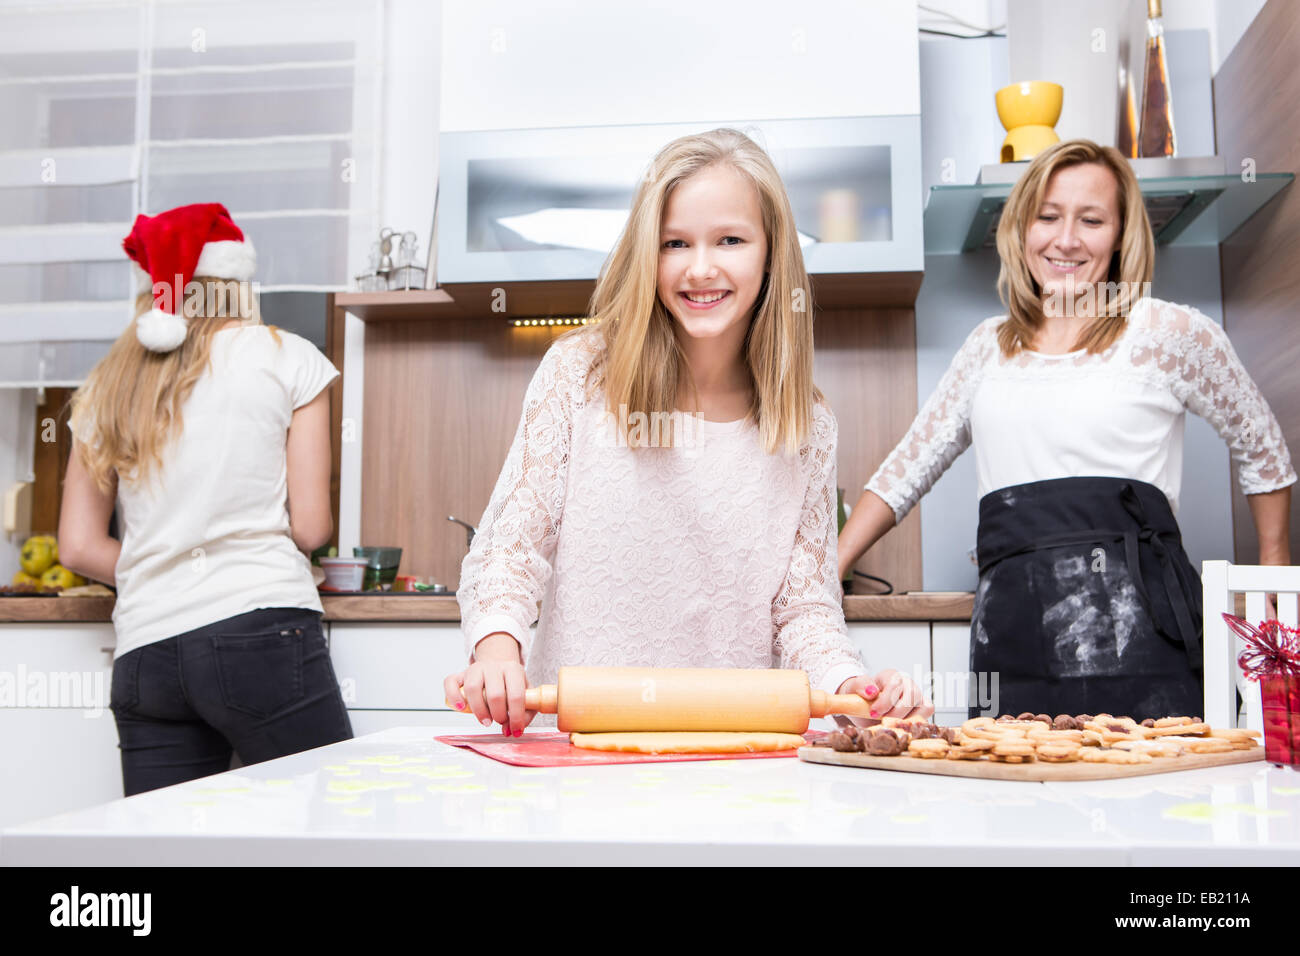 girl making xmas cookies at home with her family Stock Photo